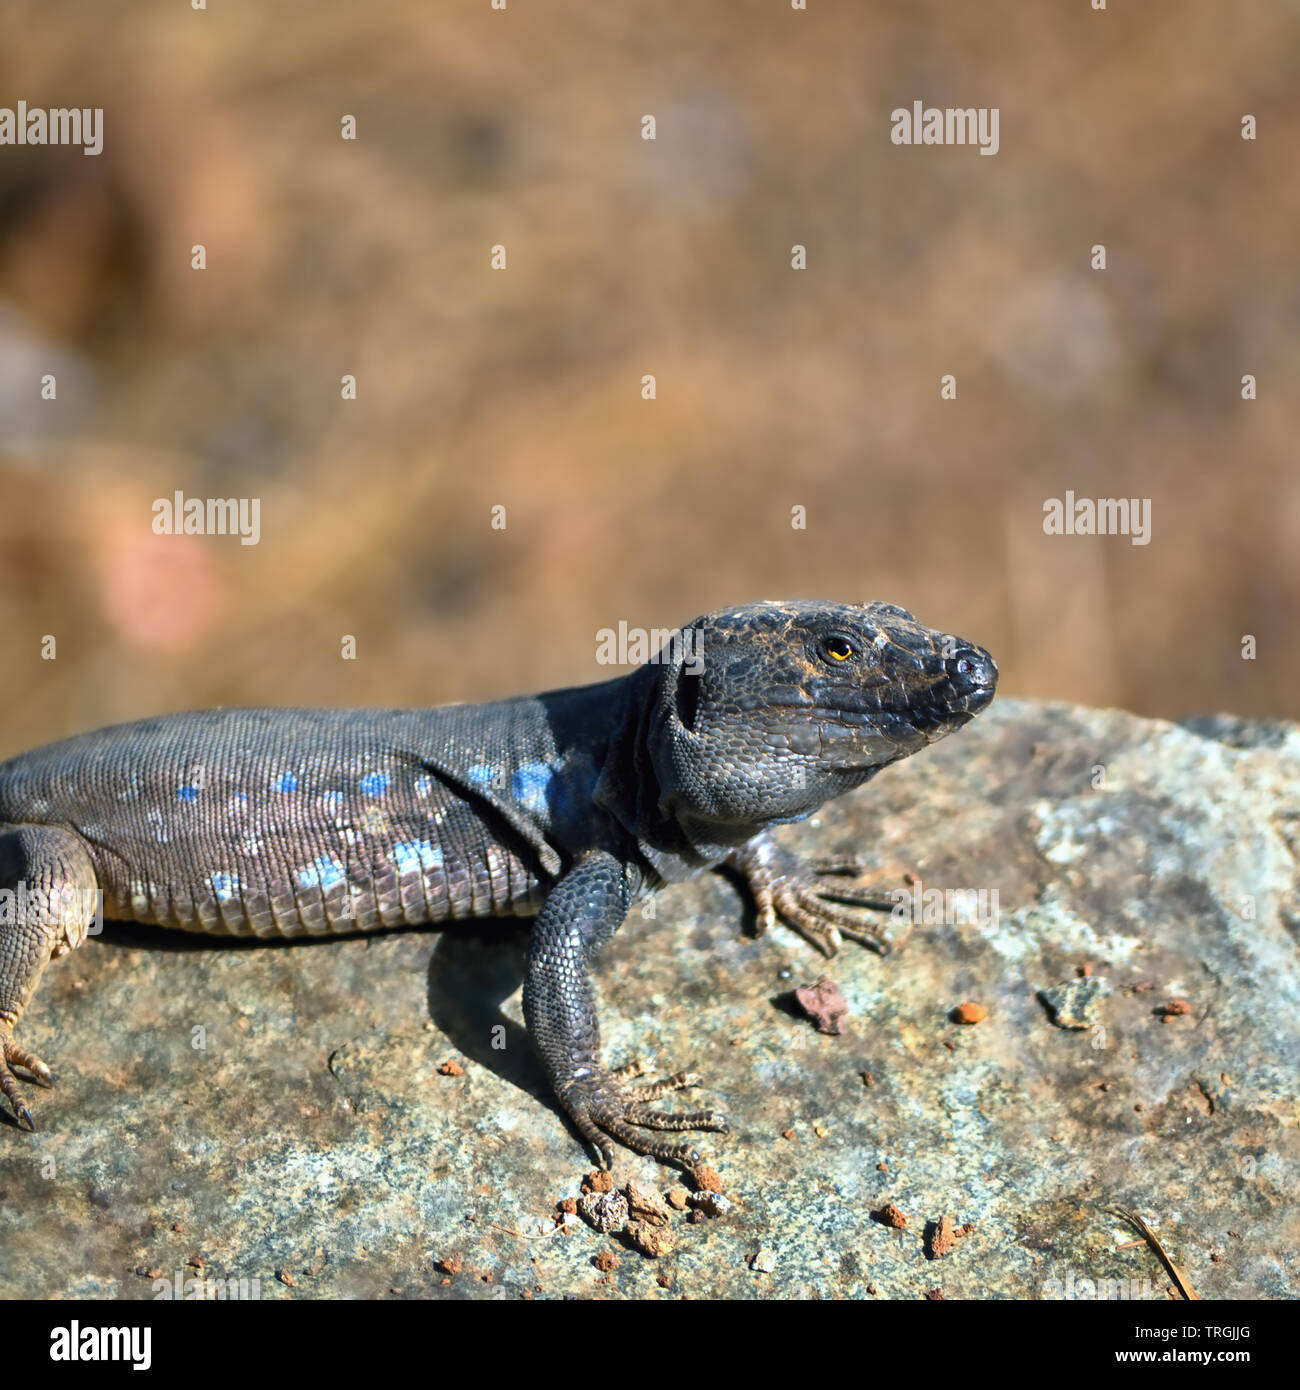 A male Lagato Canariensis (Tenerife), a reptil,  sits on a stone and looks towards the photographer, side view in closeup, calm ambience in earth tone Stock Photo